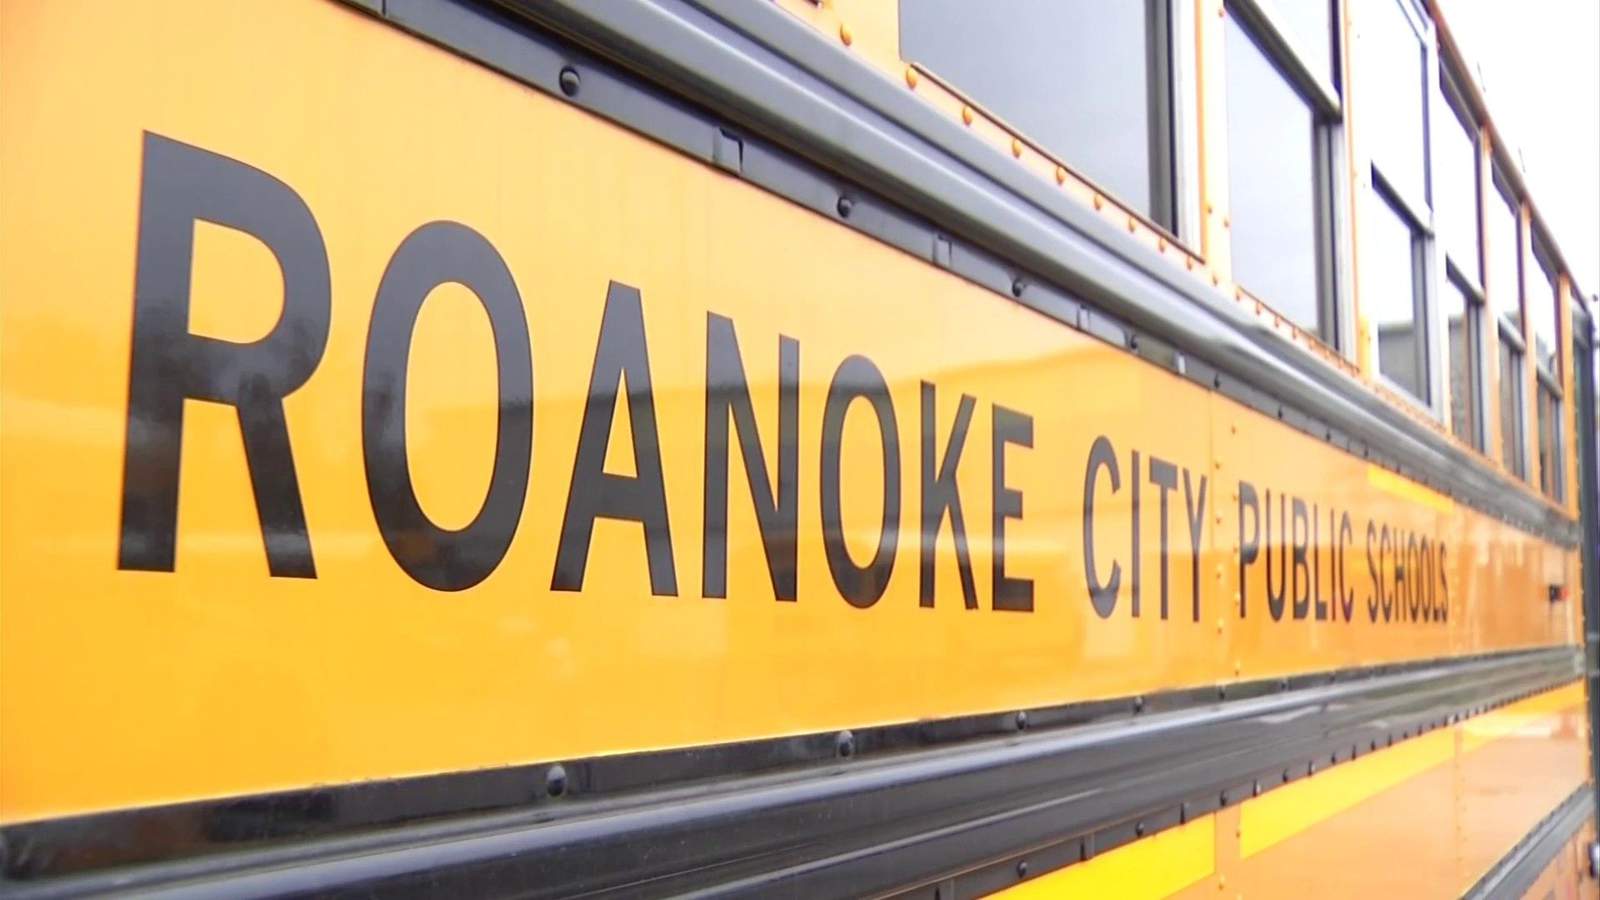 Most Roanoke City students could spend the first 9 weeks of school at home